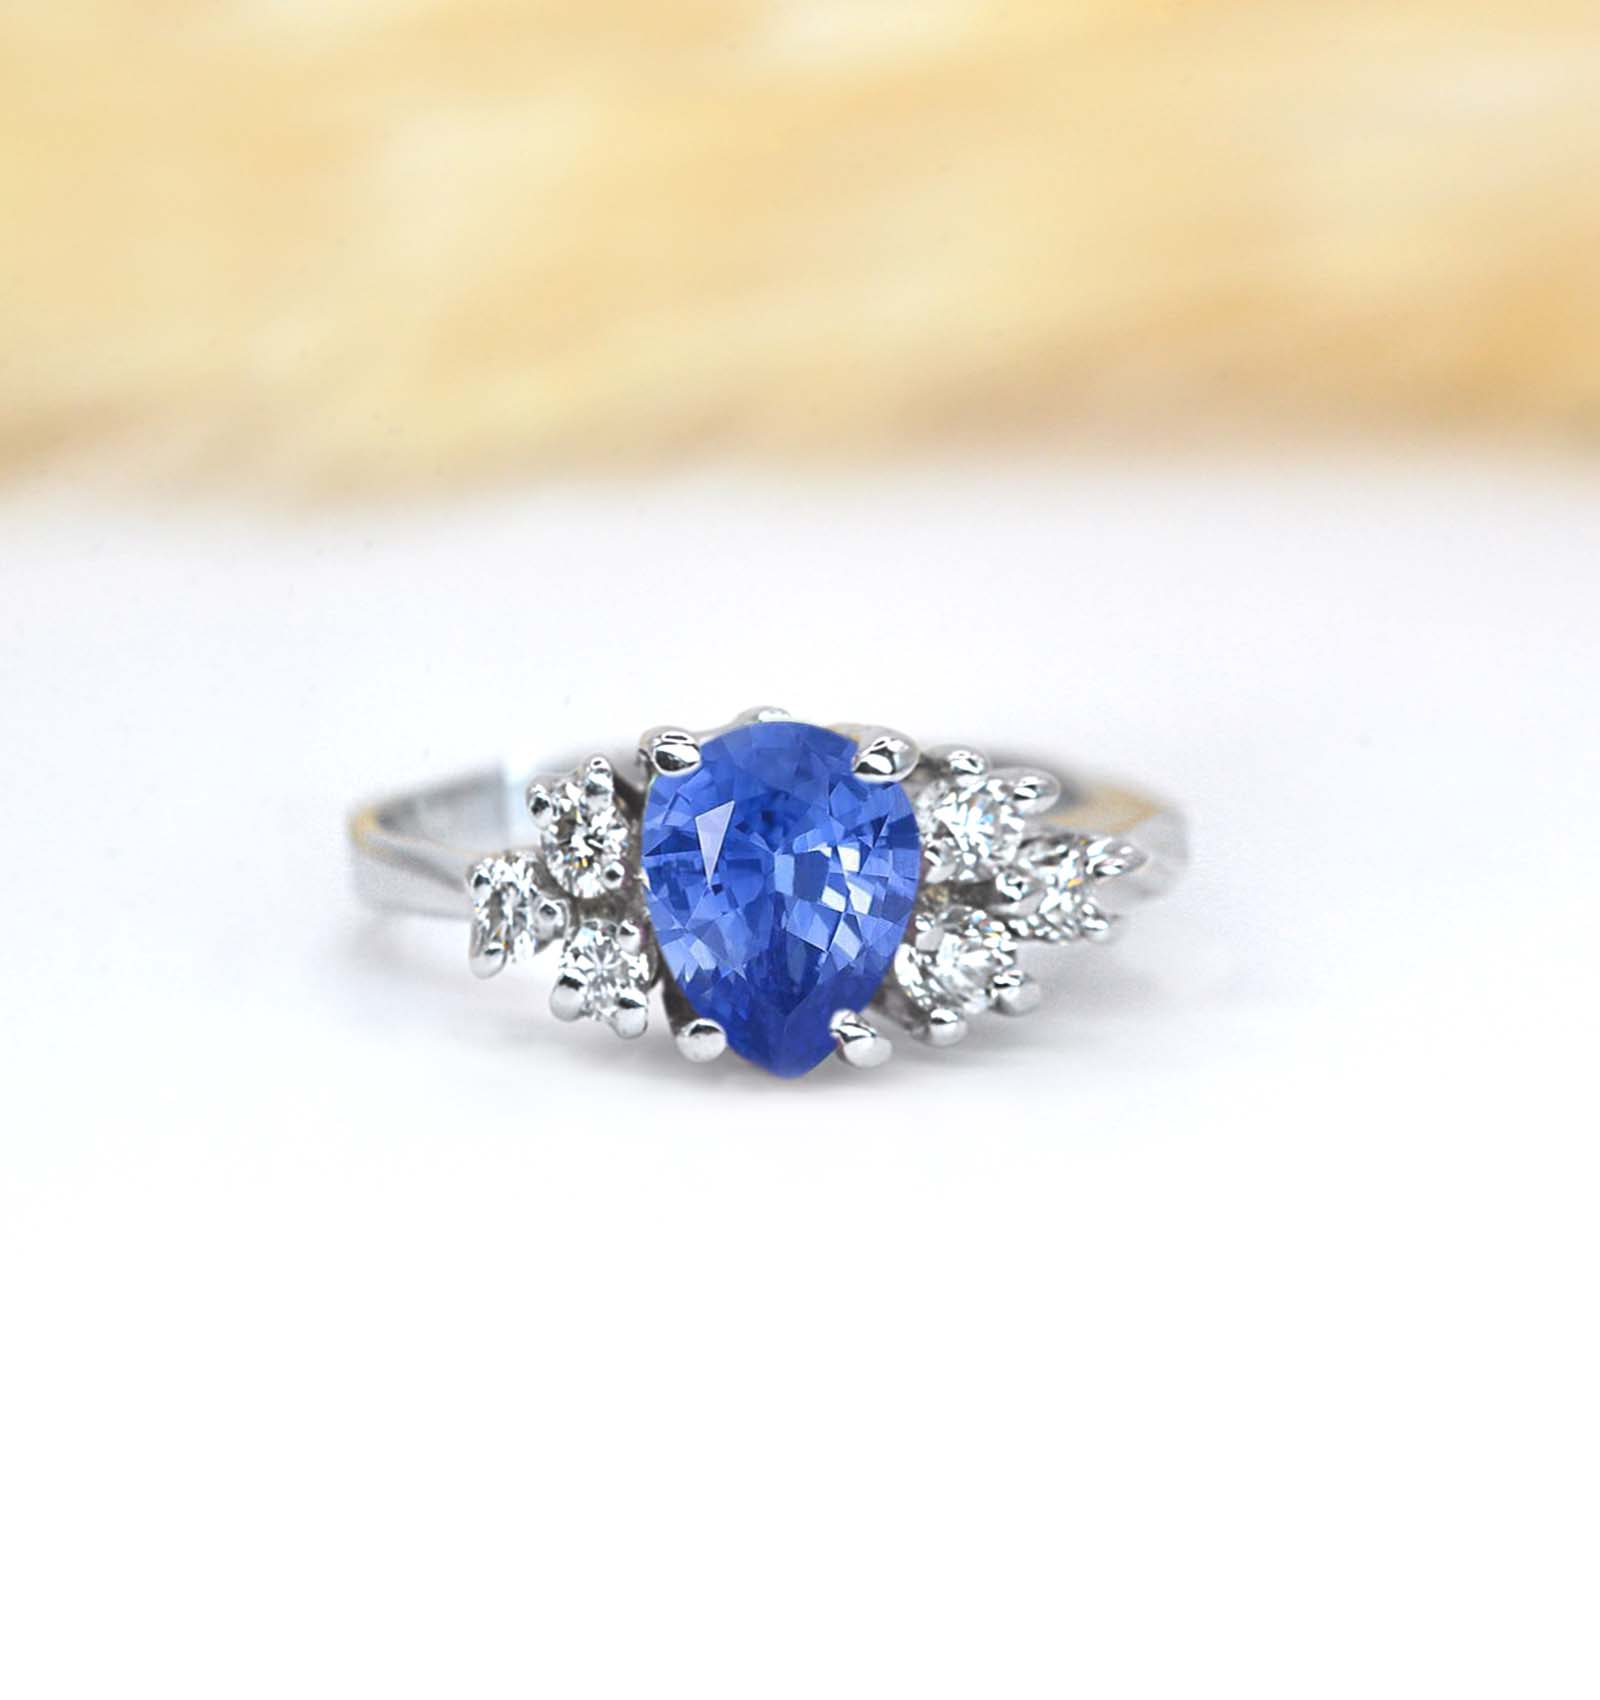 1.55ct natural pear blue sapphire ring